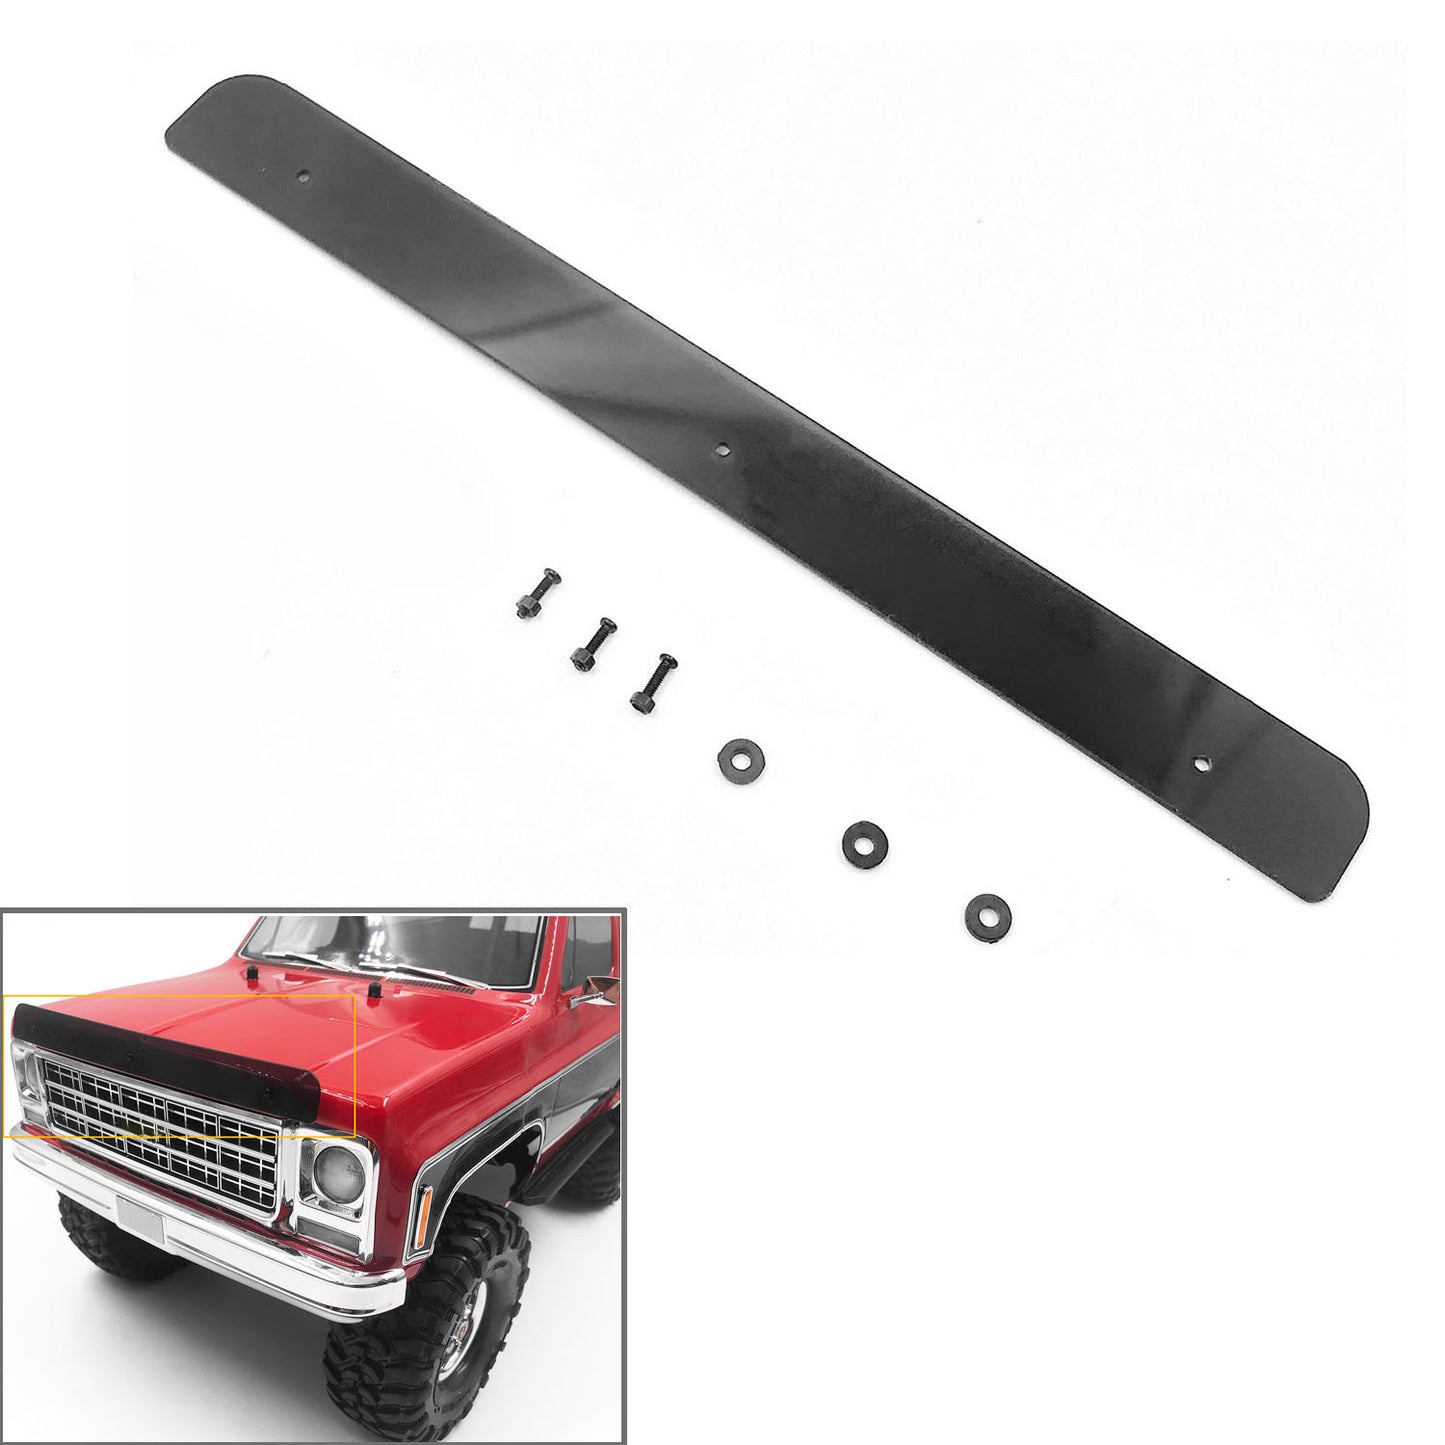 US Stock Hood Deflector Spoiler DIY Accessory for 1:10 Scale Remote Control Off-road Vehicle RC Rock Crawler Racing Cars